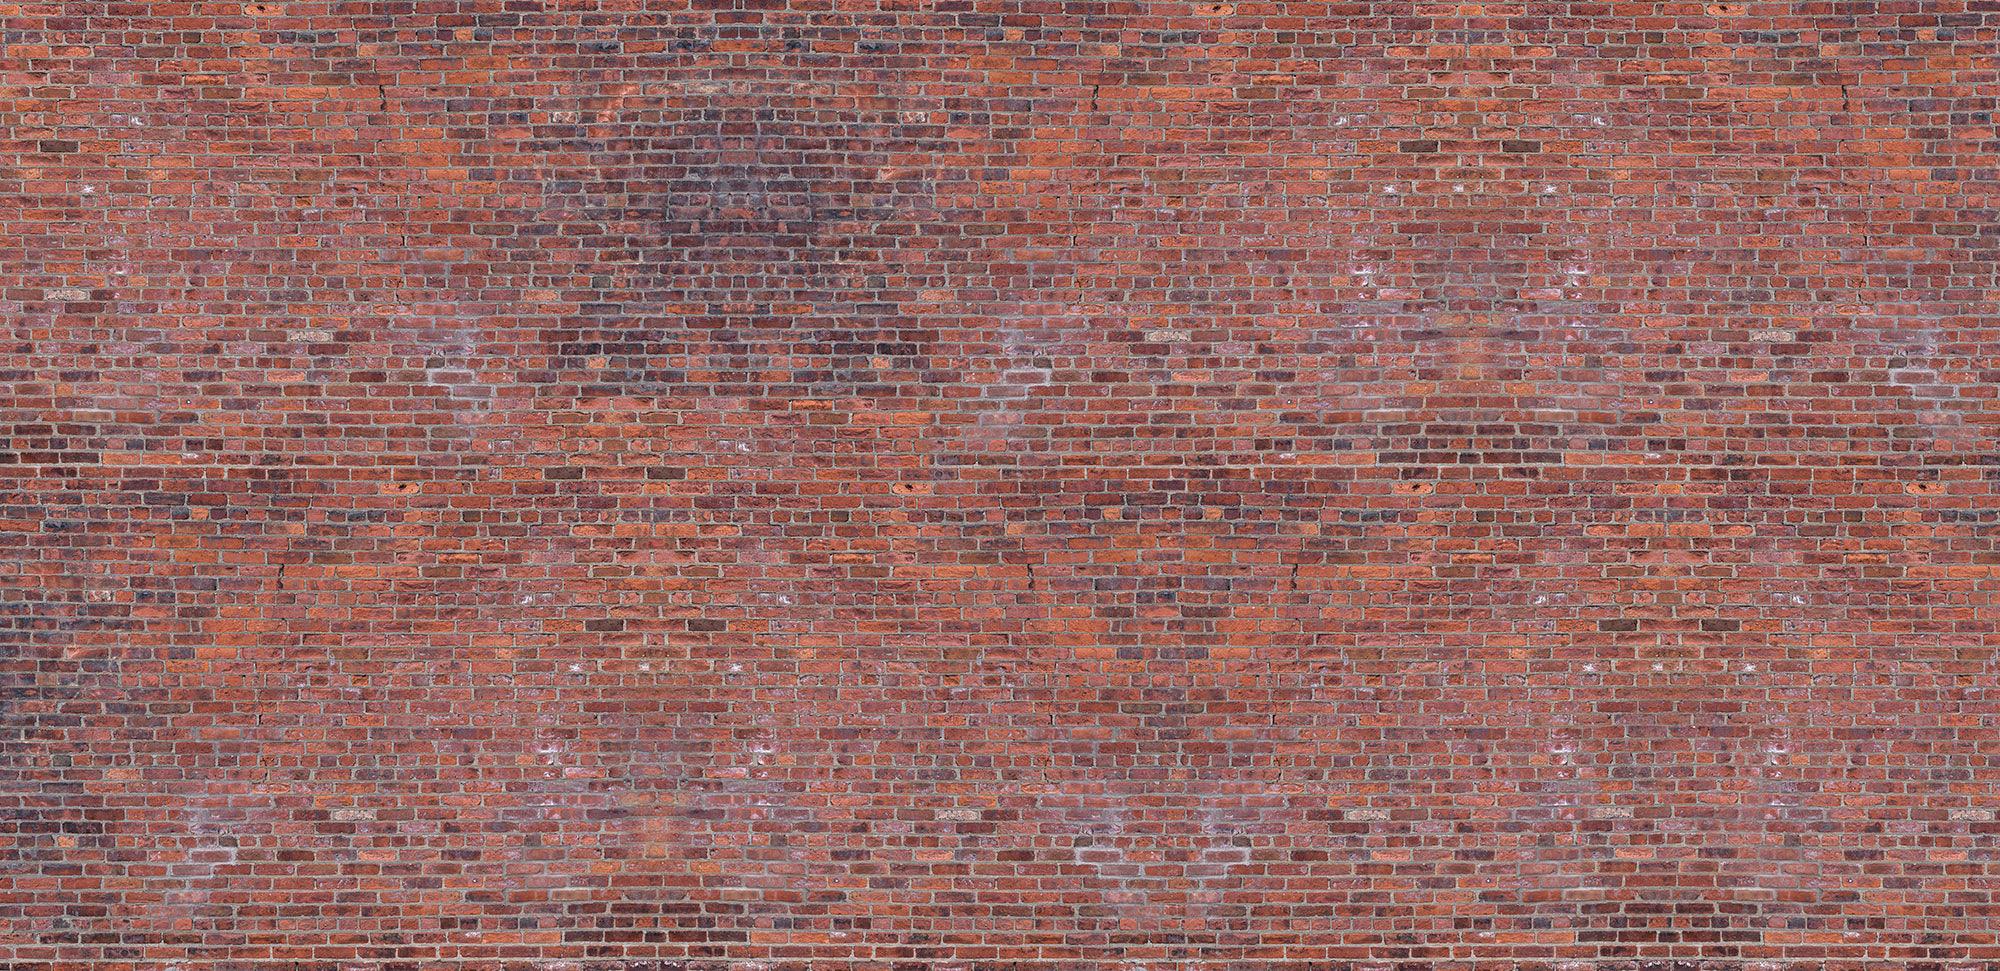 Weathered Red Brick wall GigaPixel image